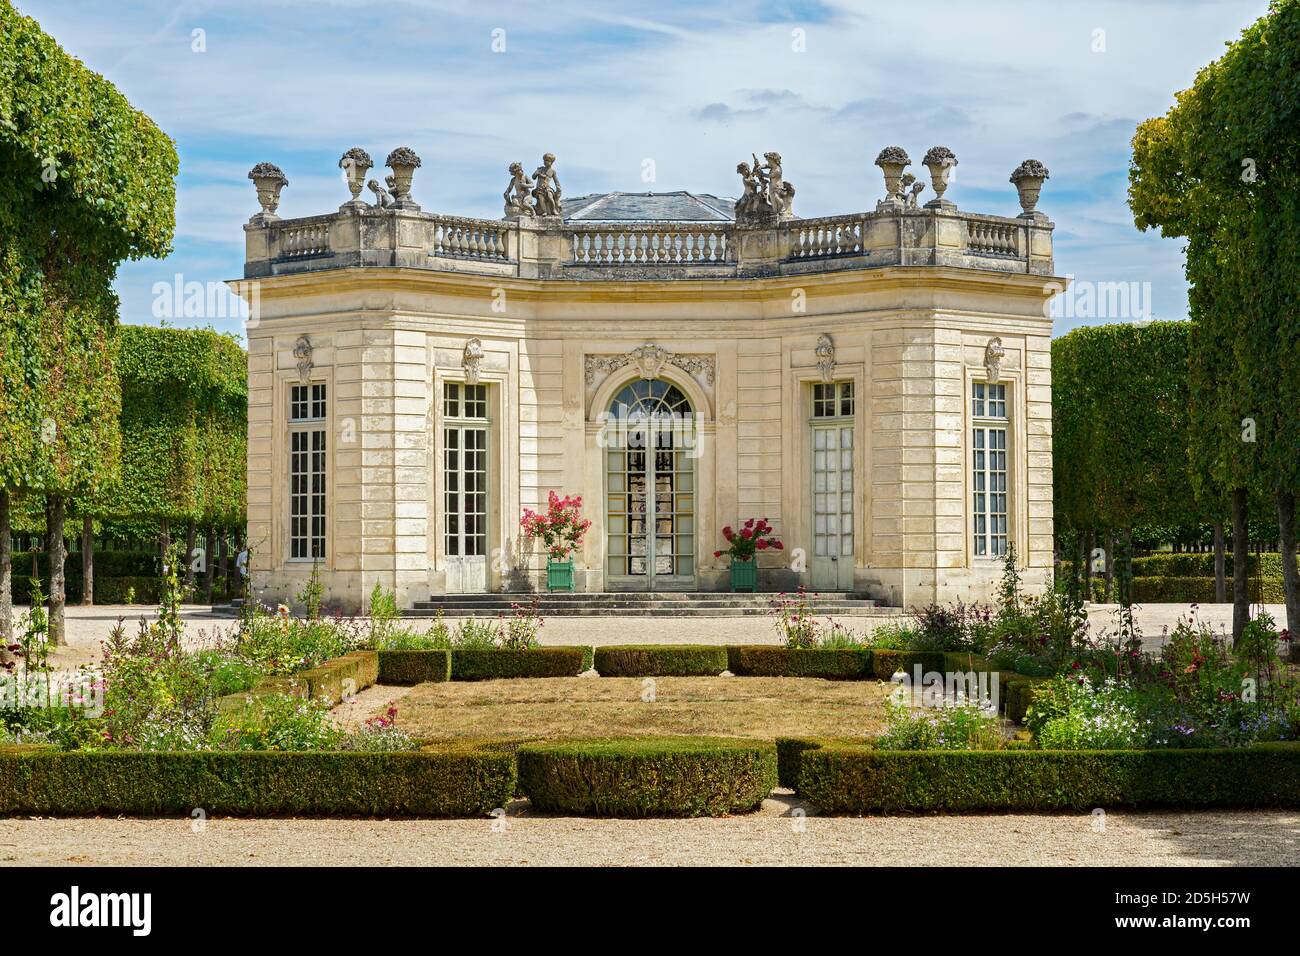 The French Pavilion and French Garden at the Petit Trianon in Versailles Stock Photo